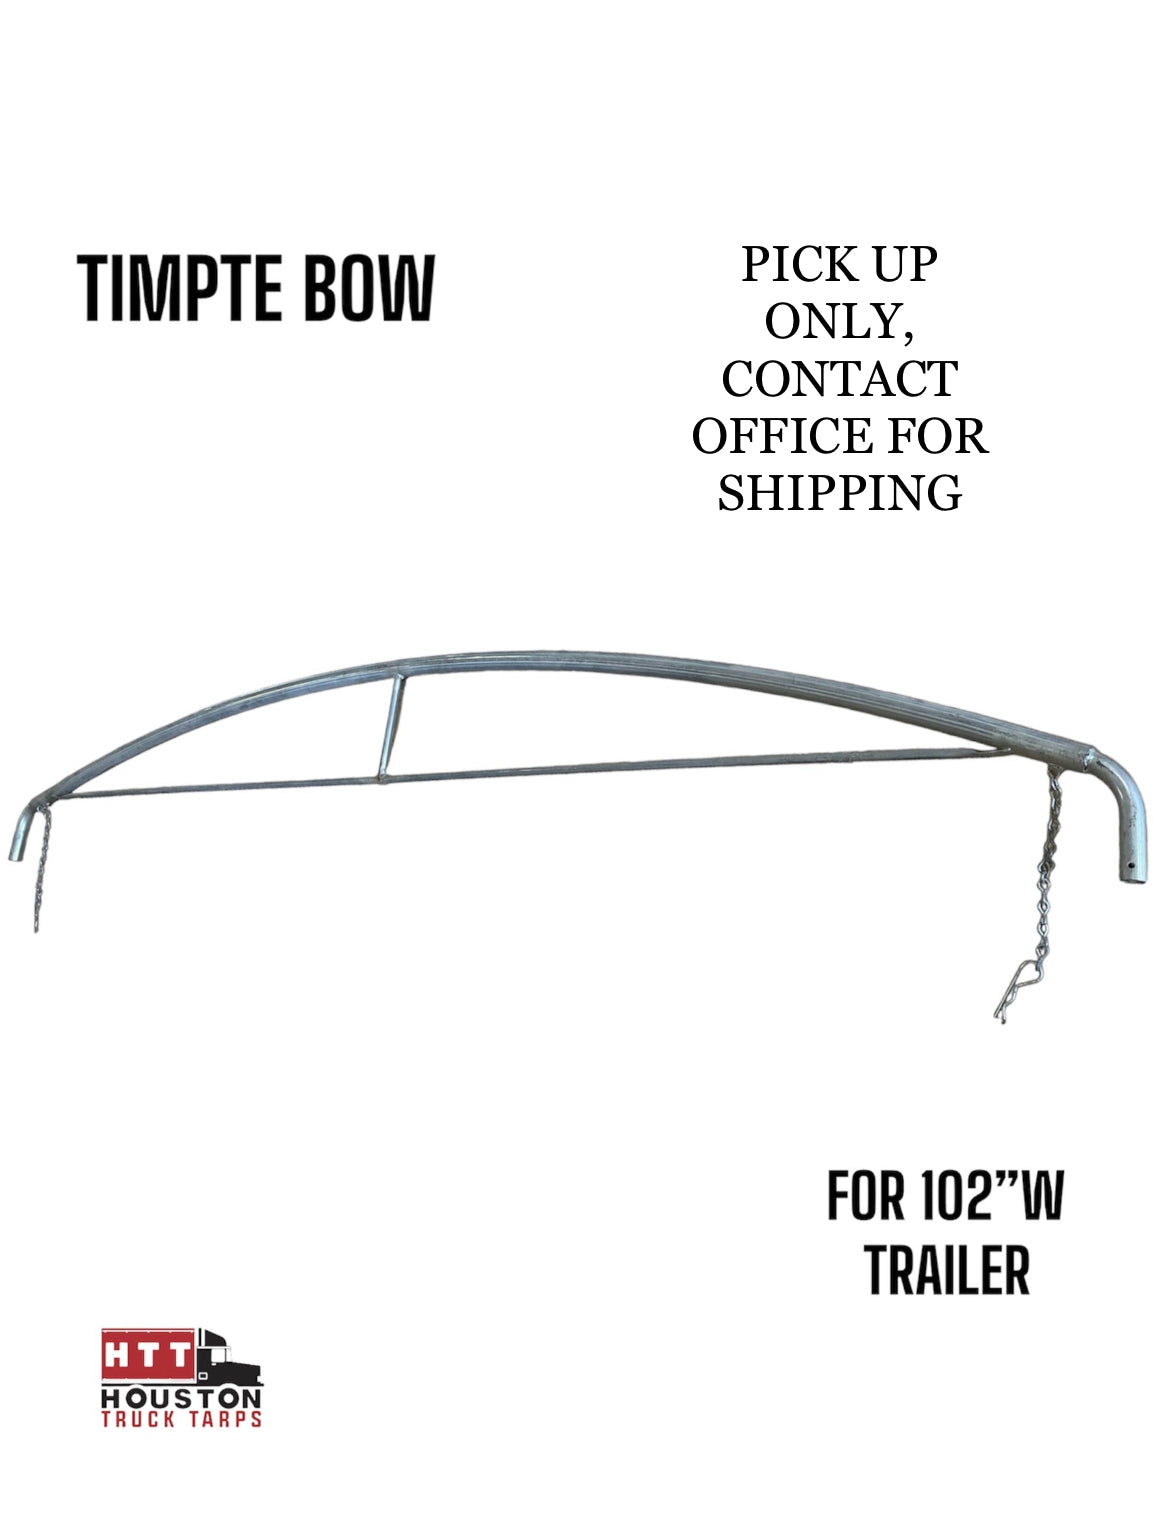 TIMPTE Bow For 102” Trailer